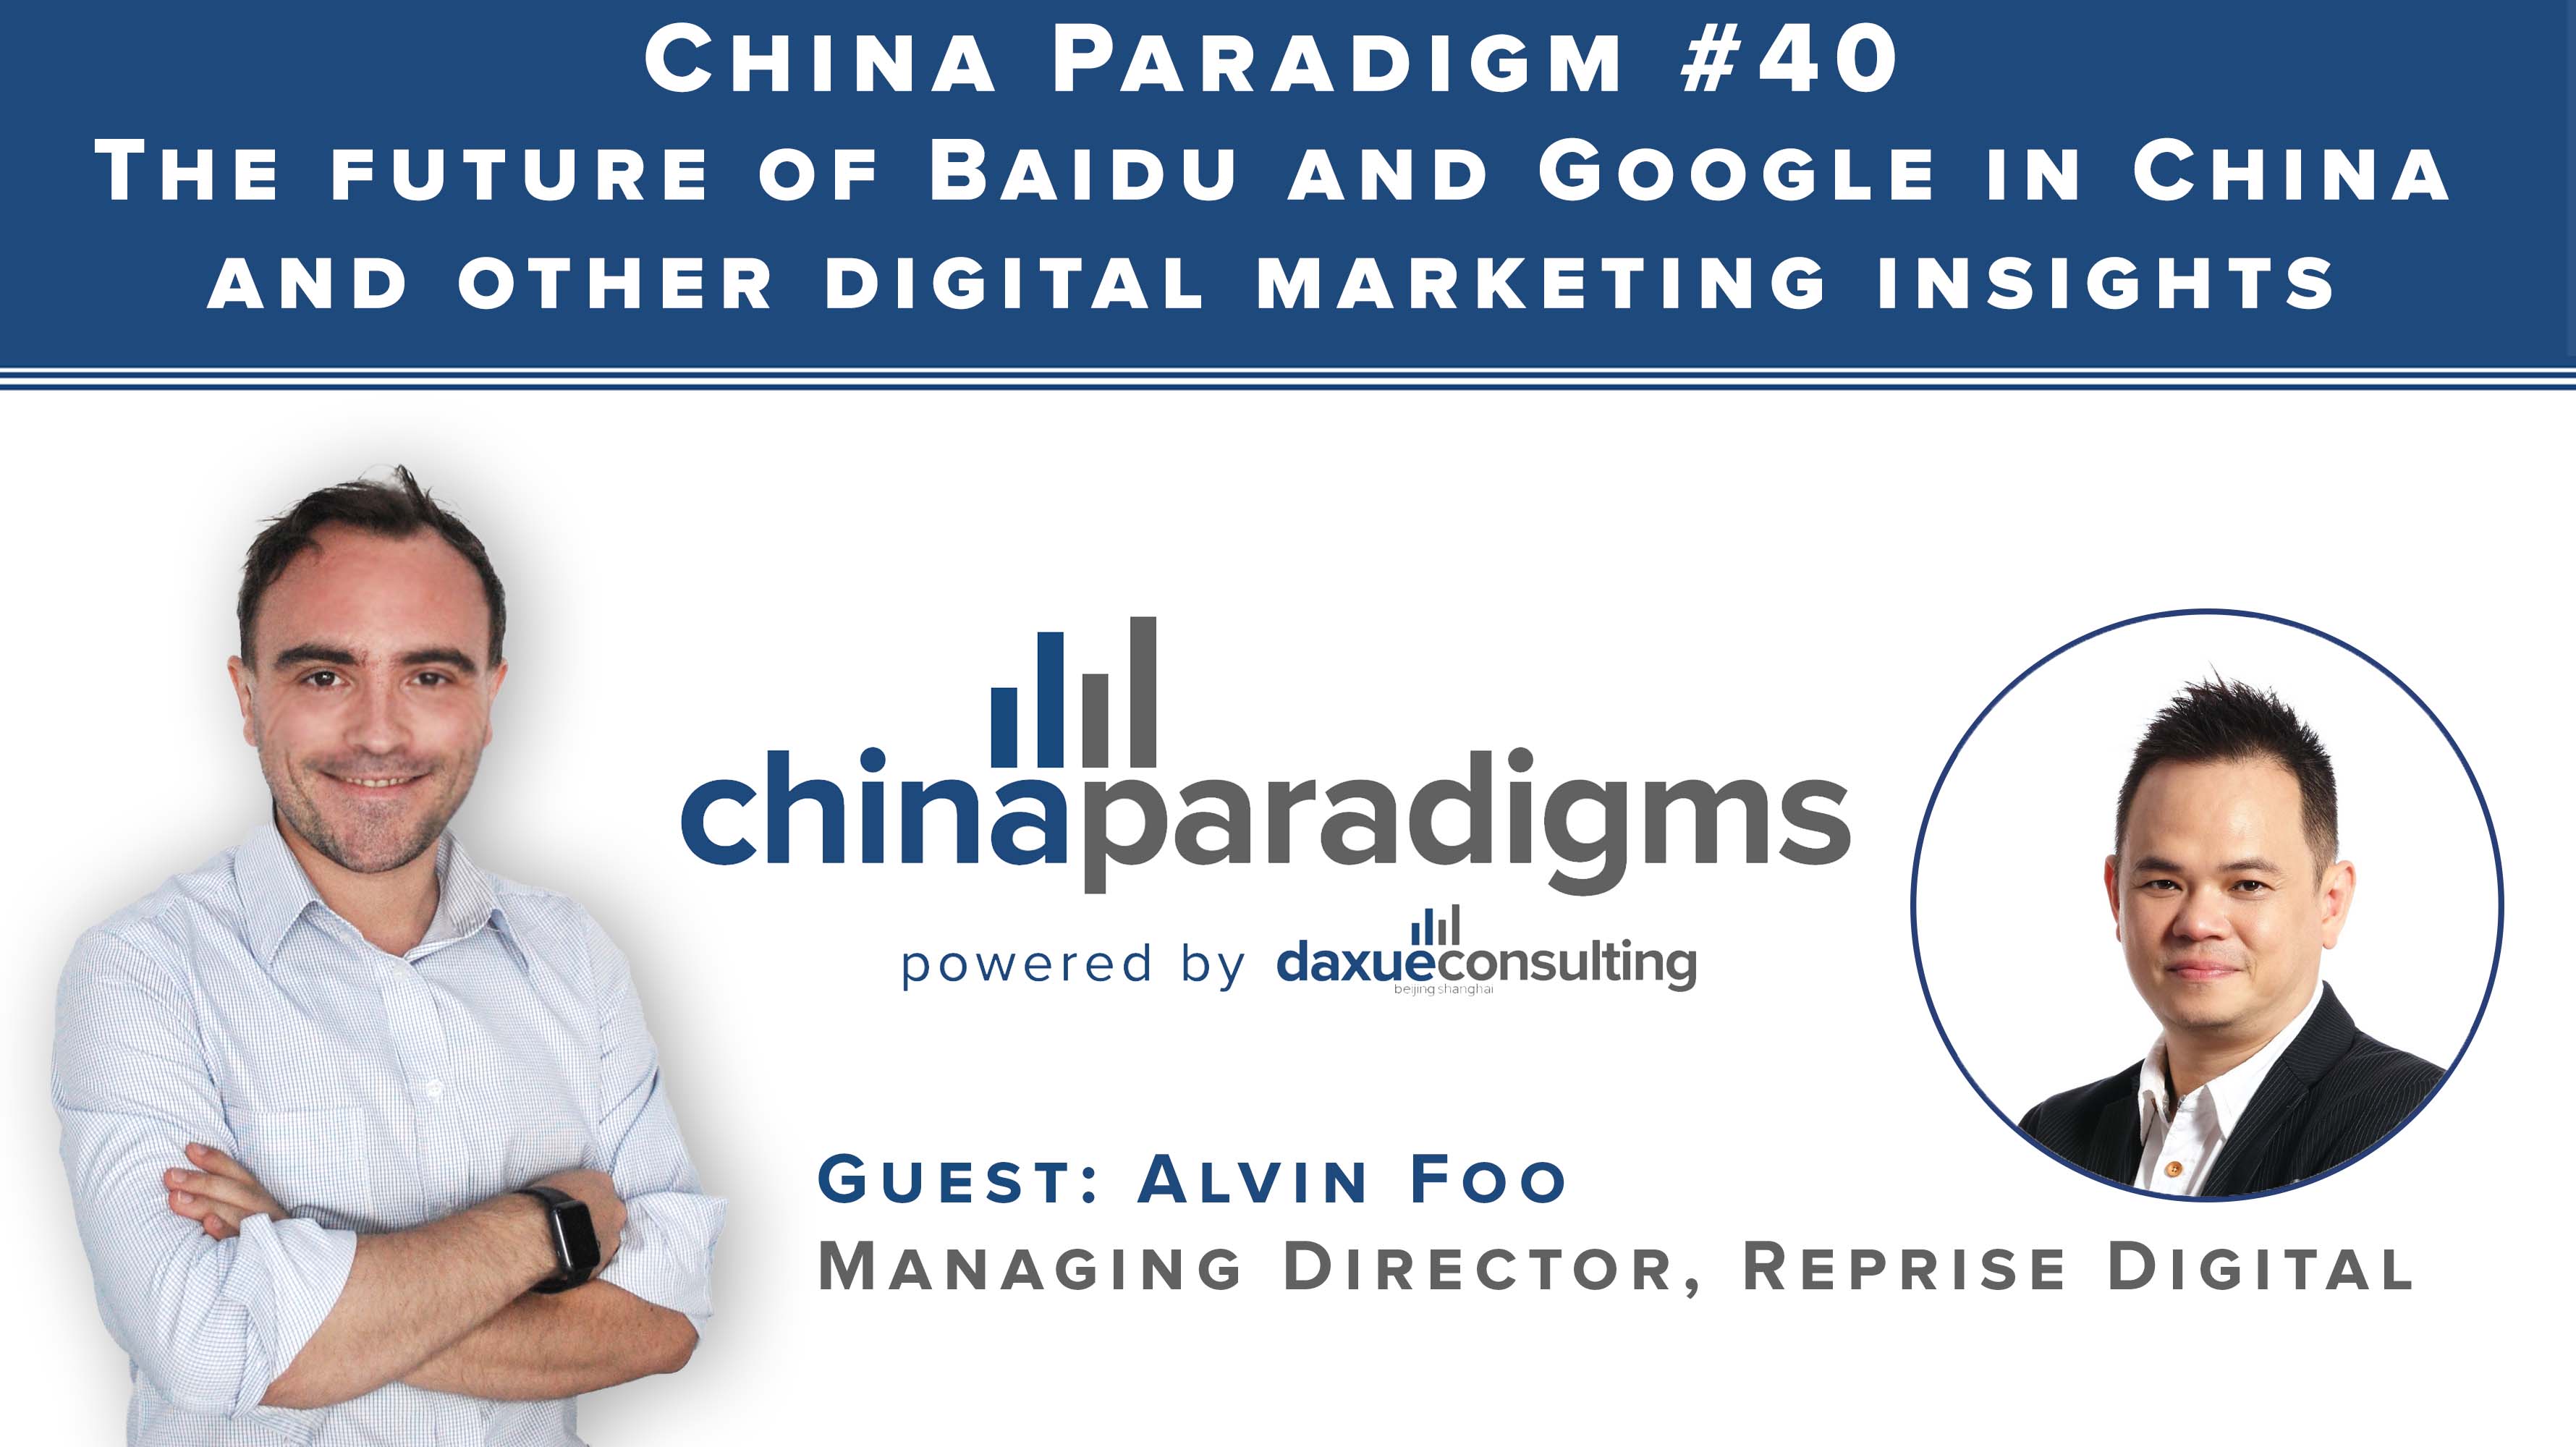 [Podcast] China Paradigm 40: The future of Baidu, Google and other digital marketing insights in China